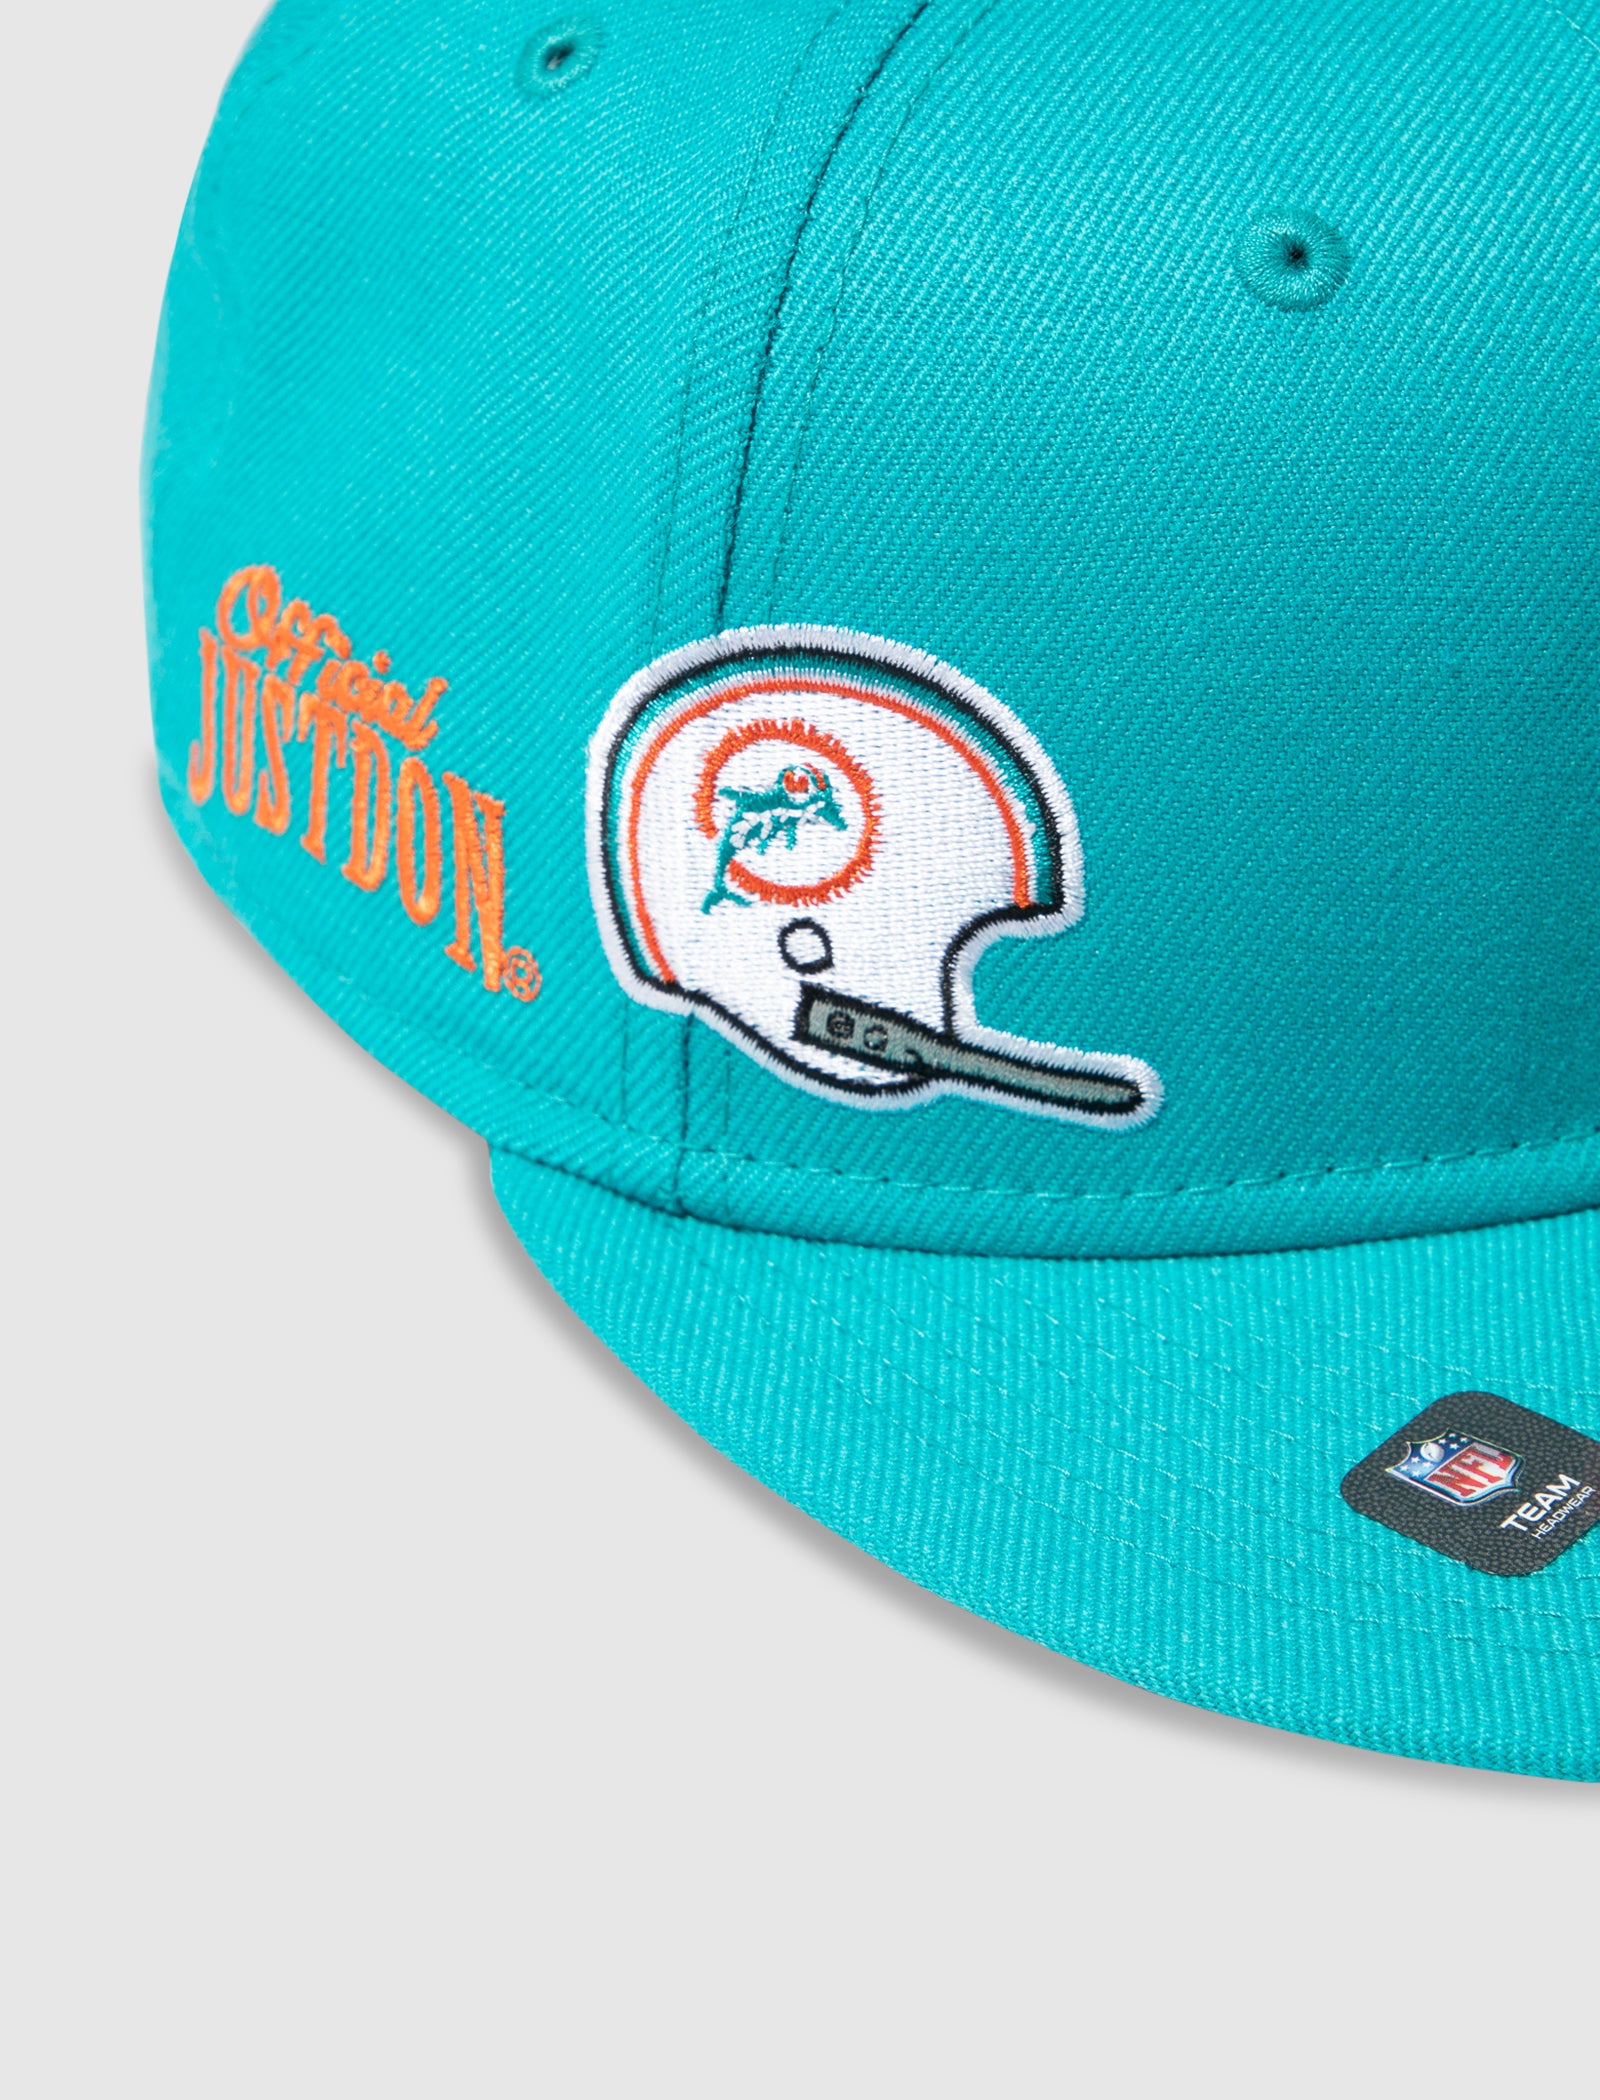 NEW ERA x JUST DON MIAMI DOLPHINS HAT